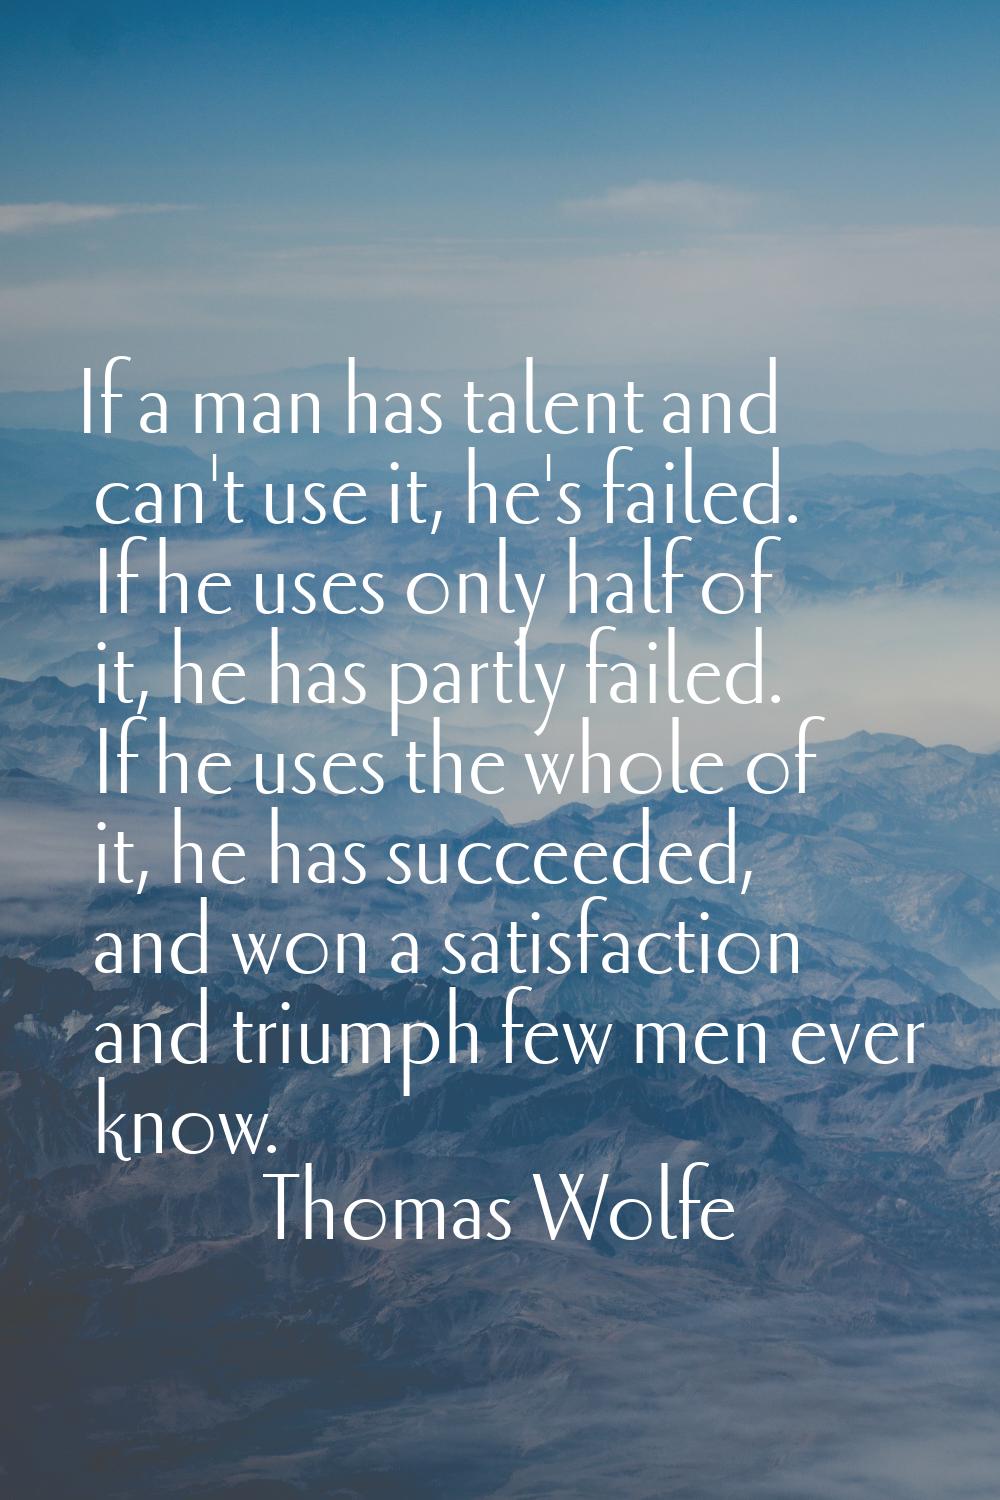 If a man has talent and can't use it, he's failed. If he uses only half of it, he has partly failed